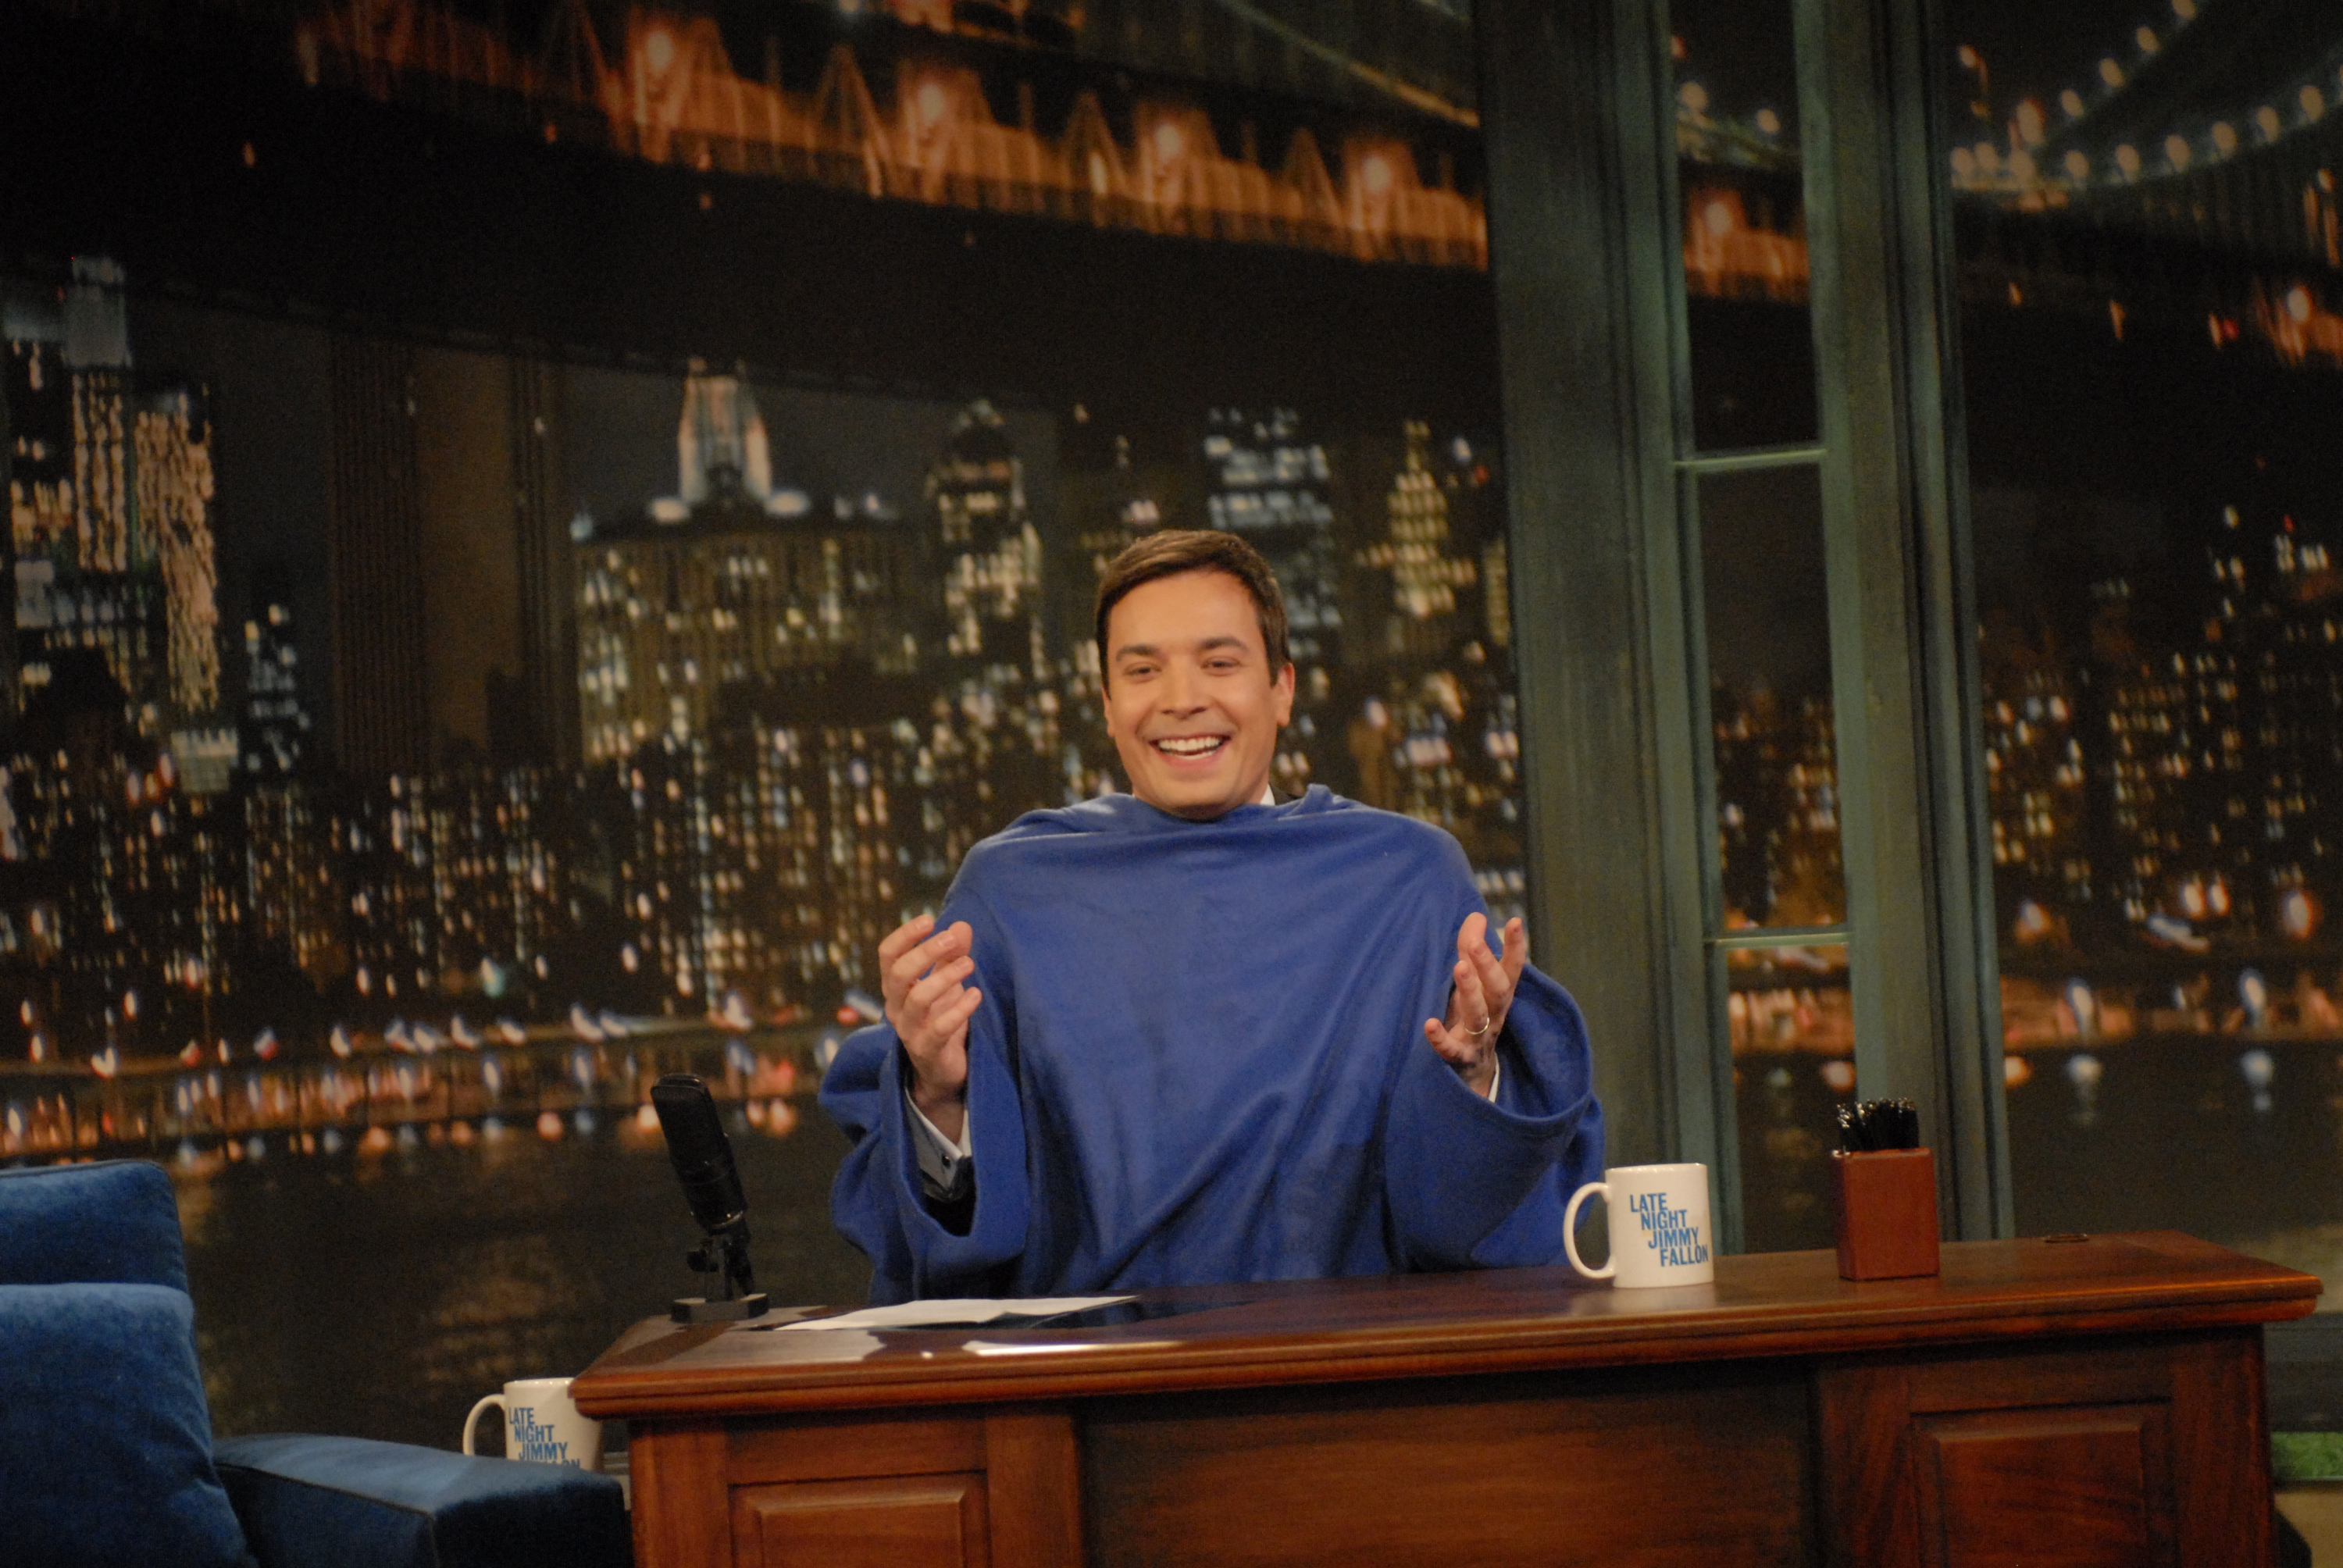 You May Be Eligible for a Refund If You Bought a Snuggie in the Past 2 Decades